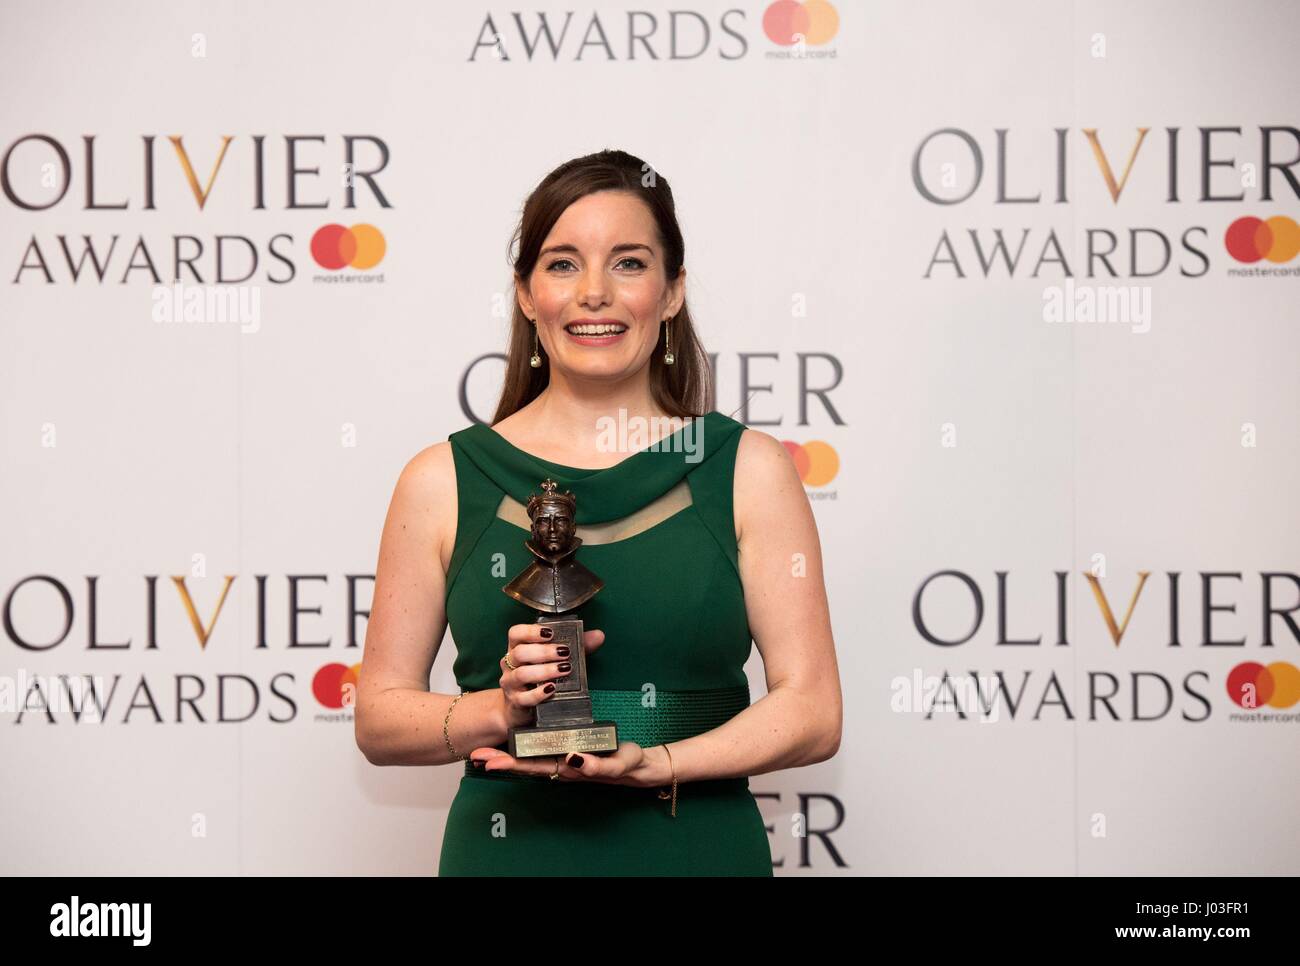 Rebecca Trehearn with the award for best supporting actress in a musical at the Olivier Awards 2017, held at the Royal Albert Hall in London. Stock Photo